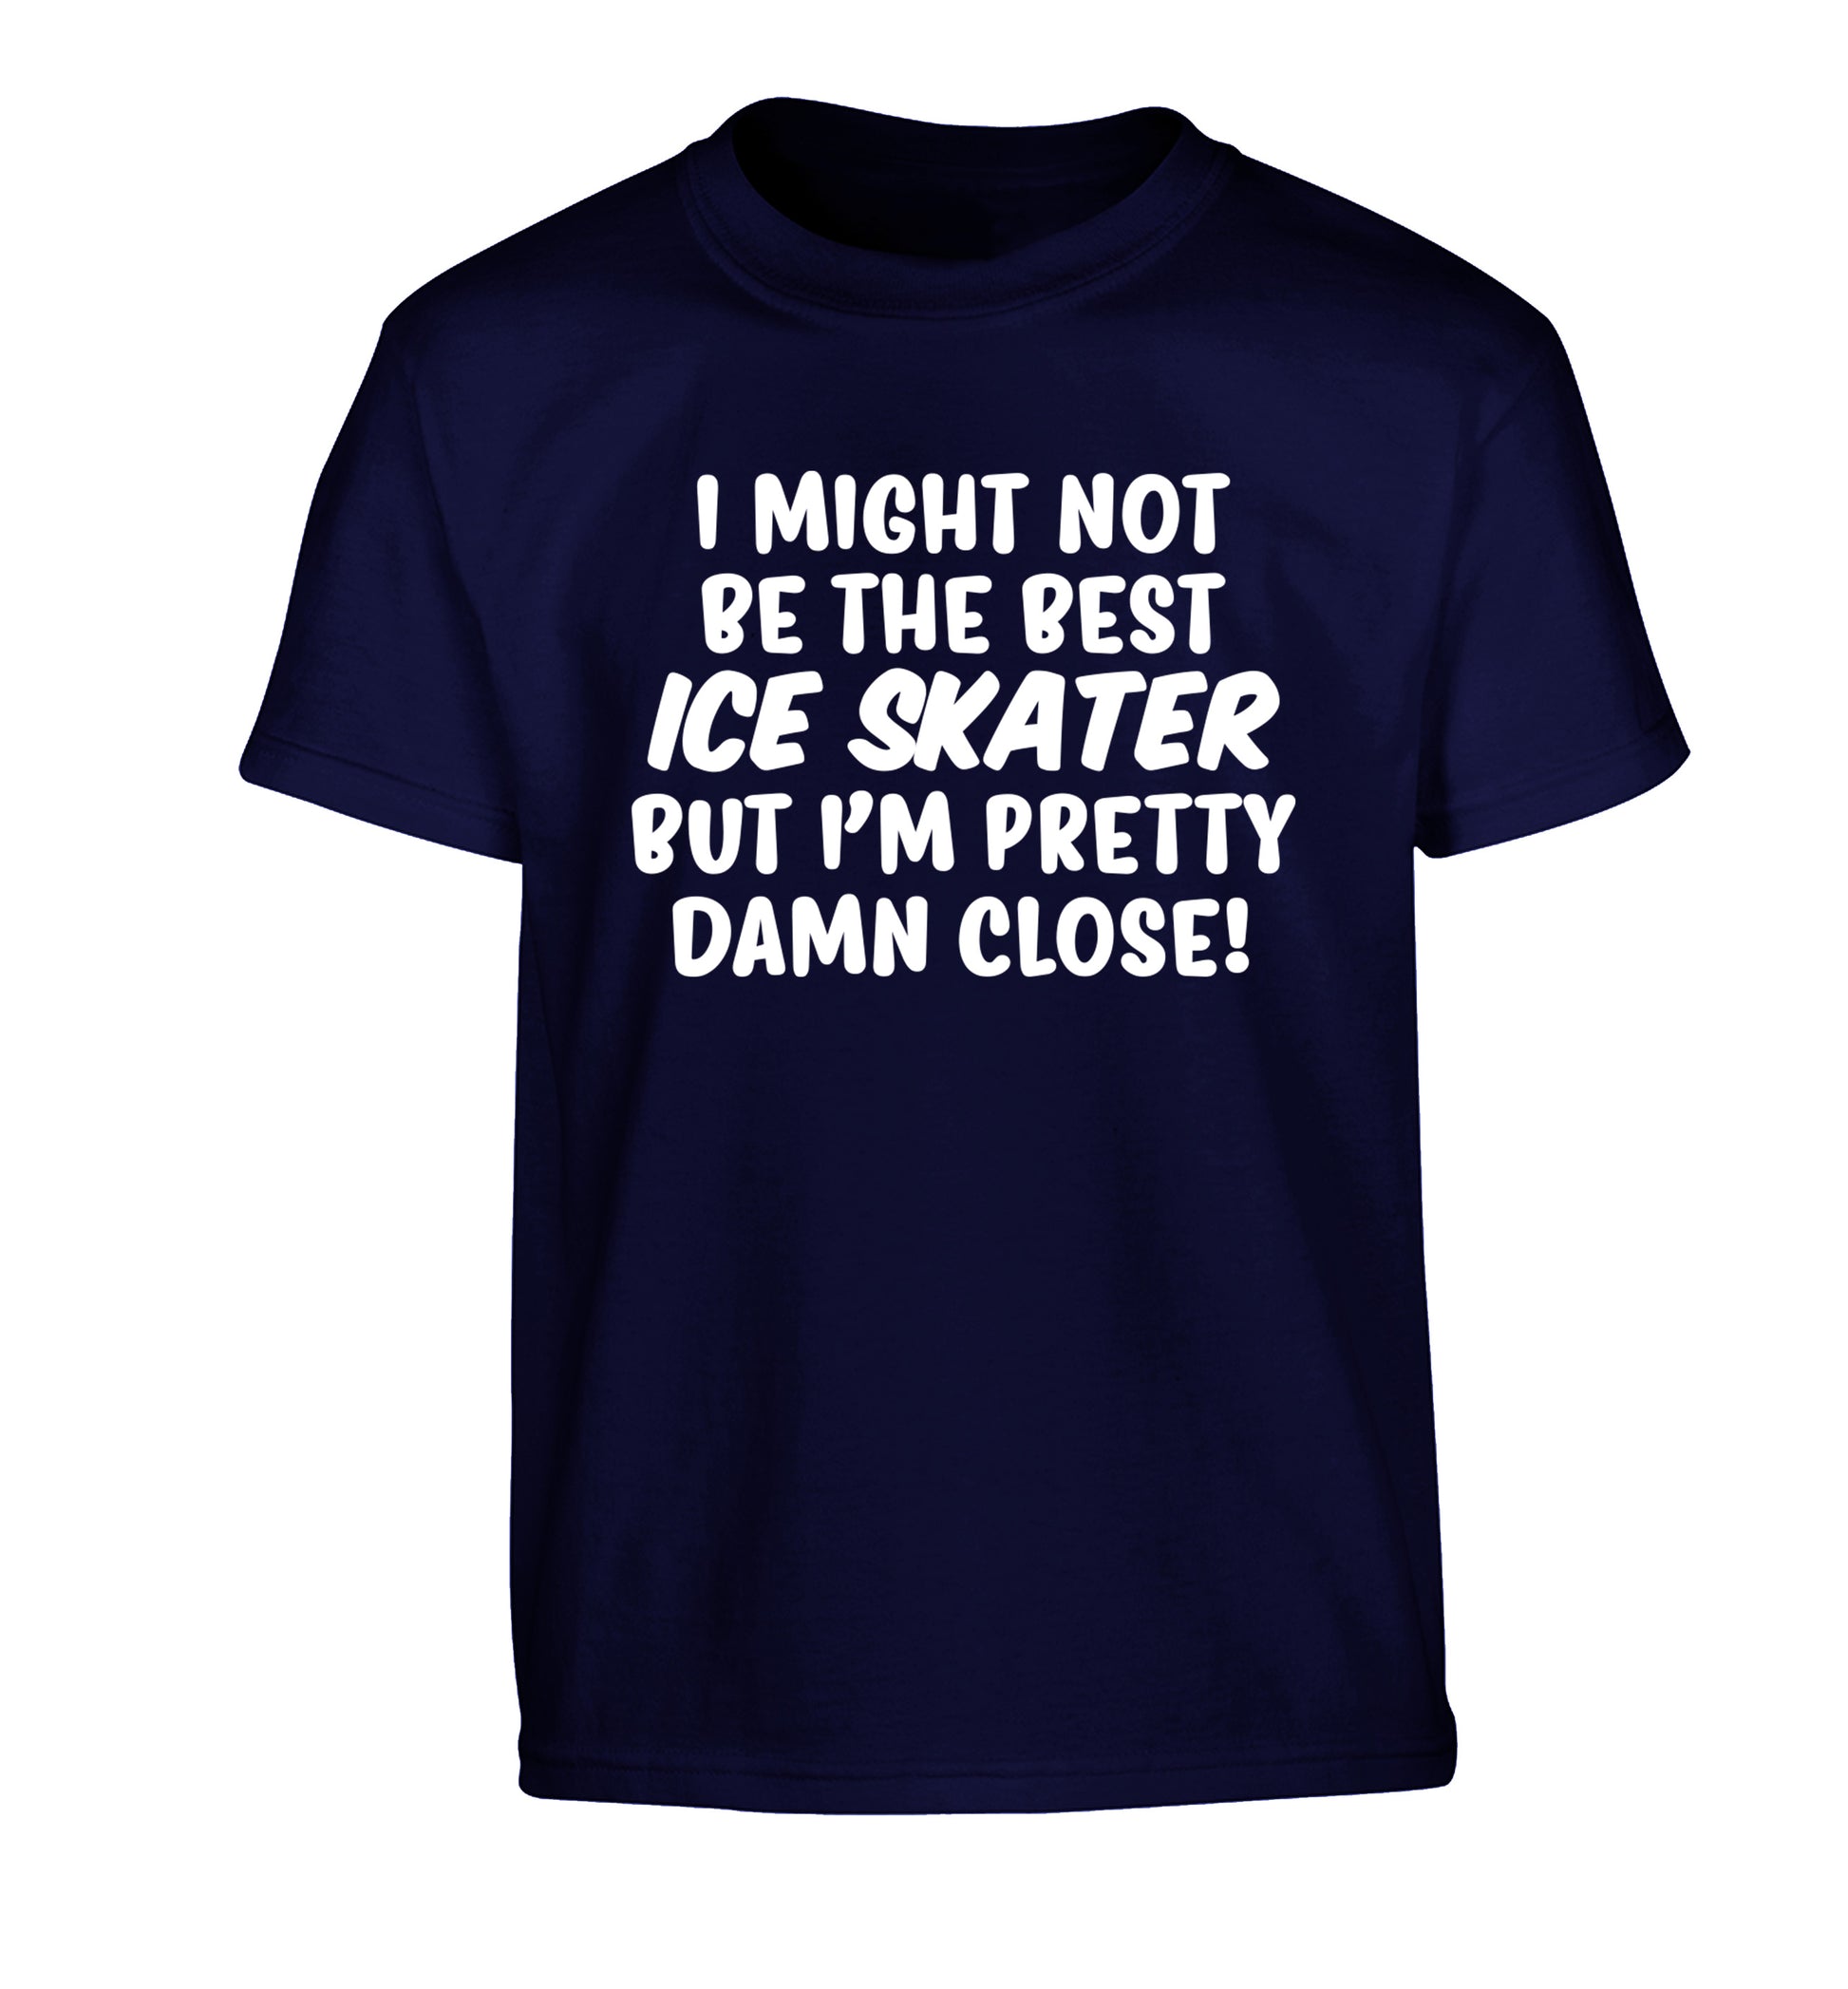 I might not be the best ice skater but I'm pretty damn close! Children's navy Tshirt 12-14 Years